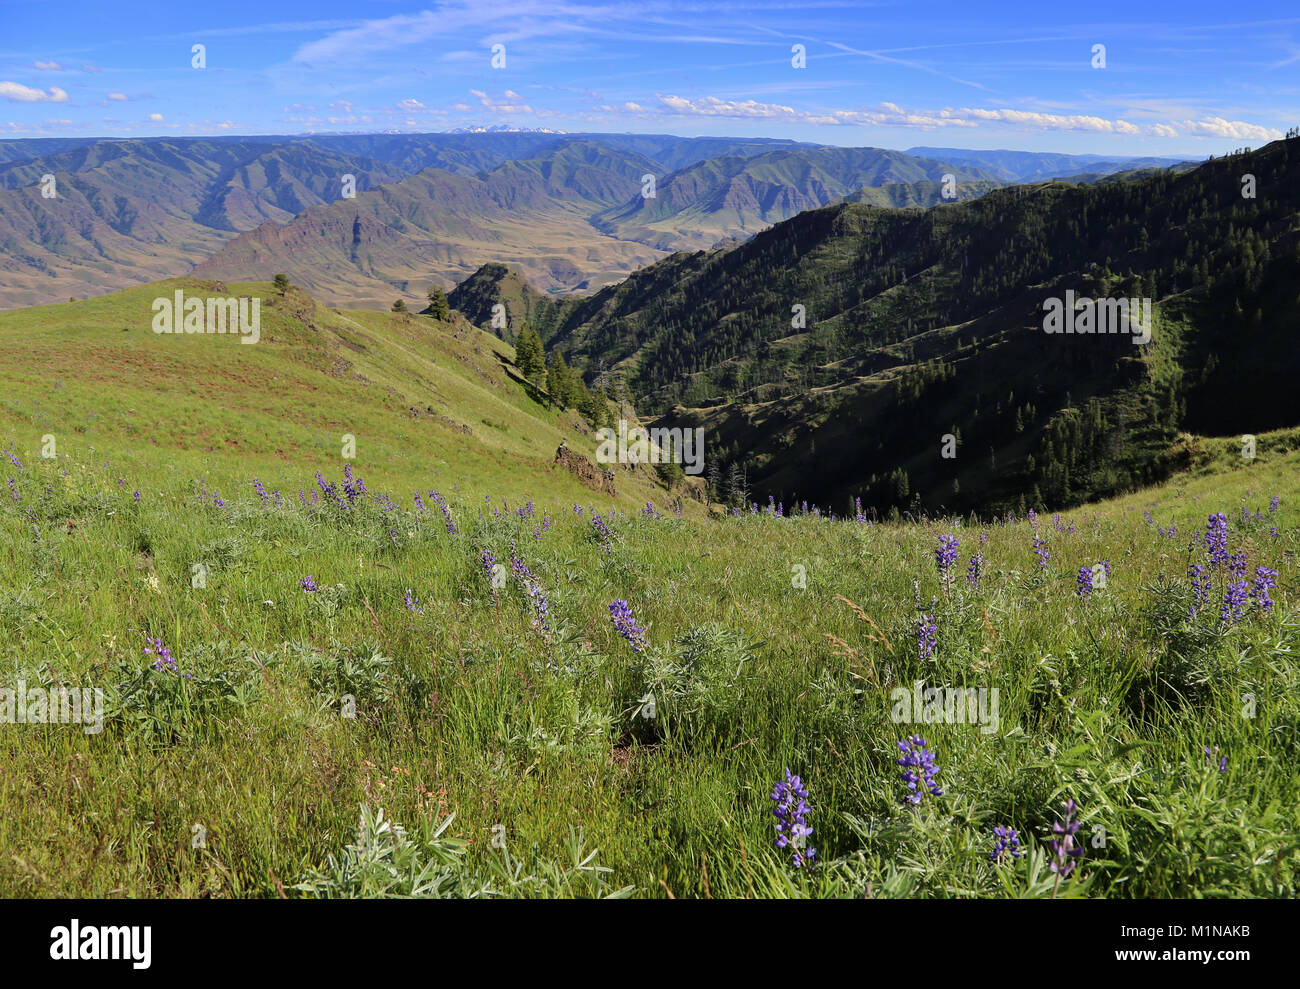 Stunning views of the Hells Canyon National Recreation Area from along the Nez Perce (Nee-Me-Poo) trail in Eastern Oregon. Stock Photo